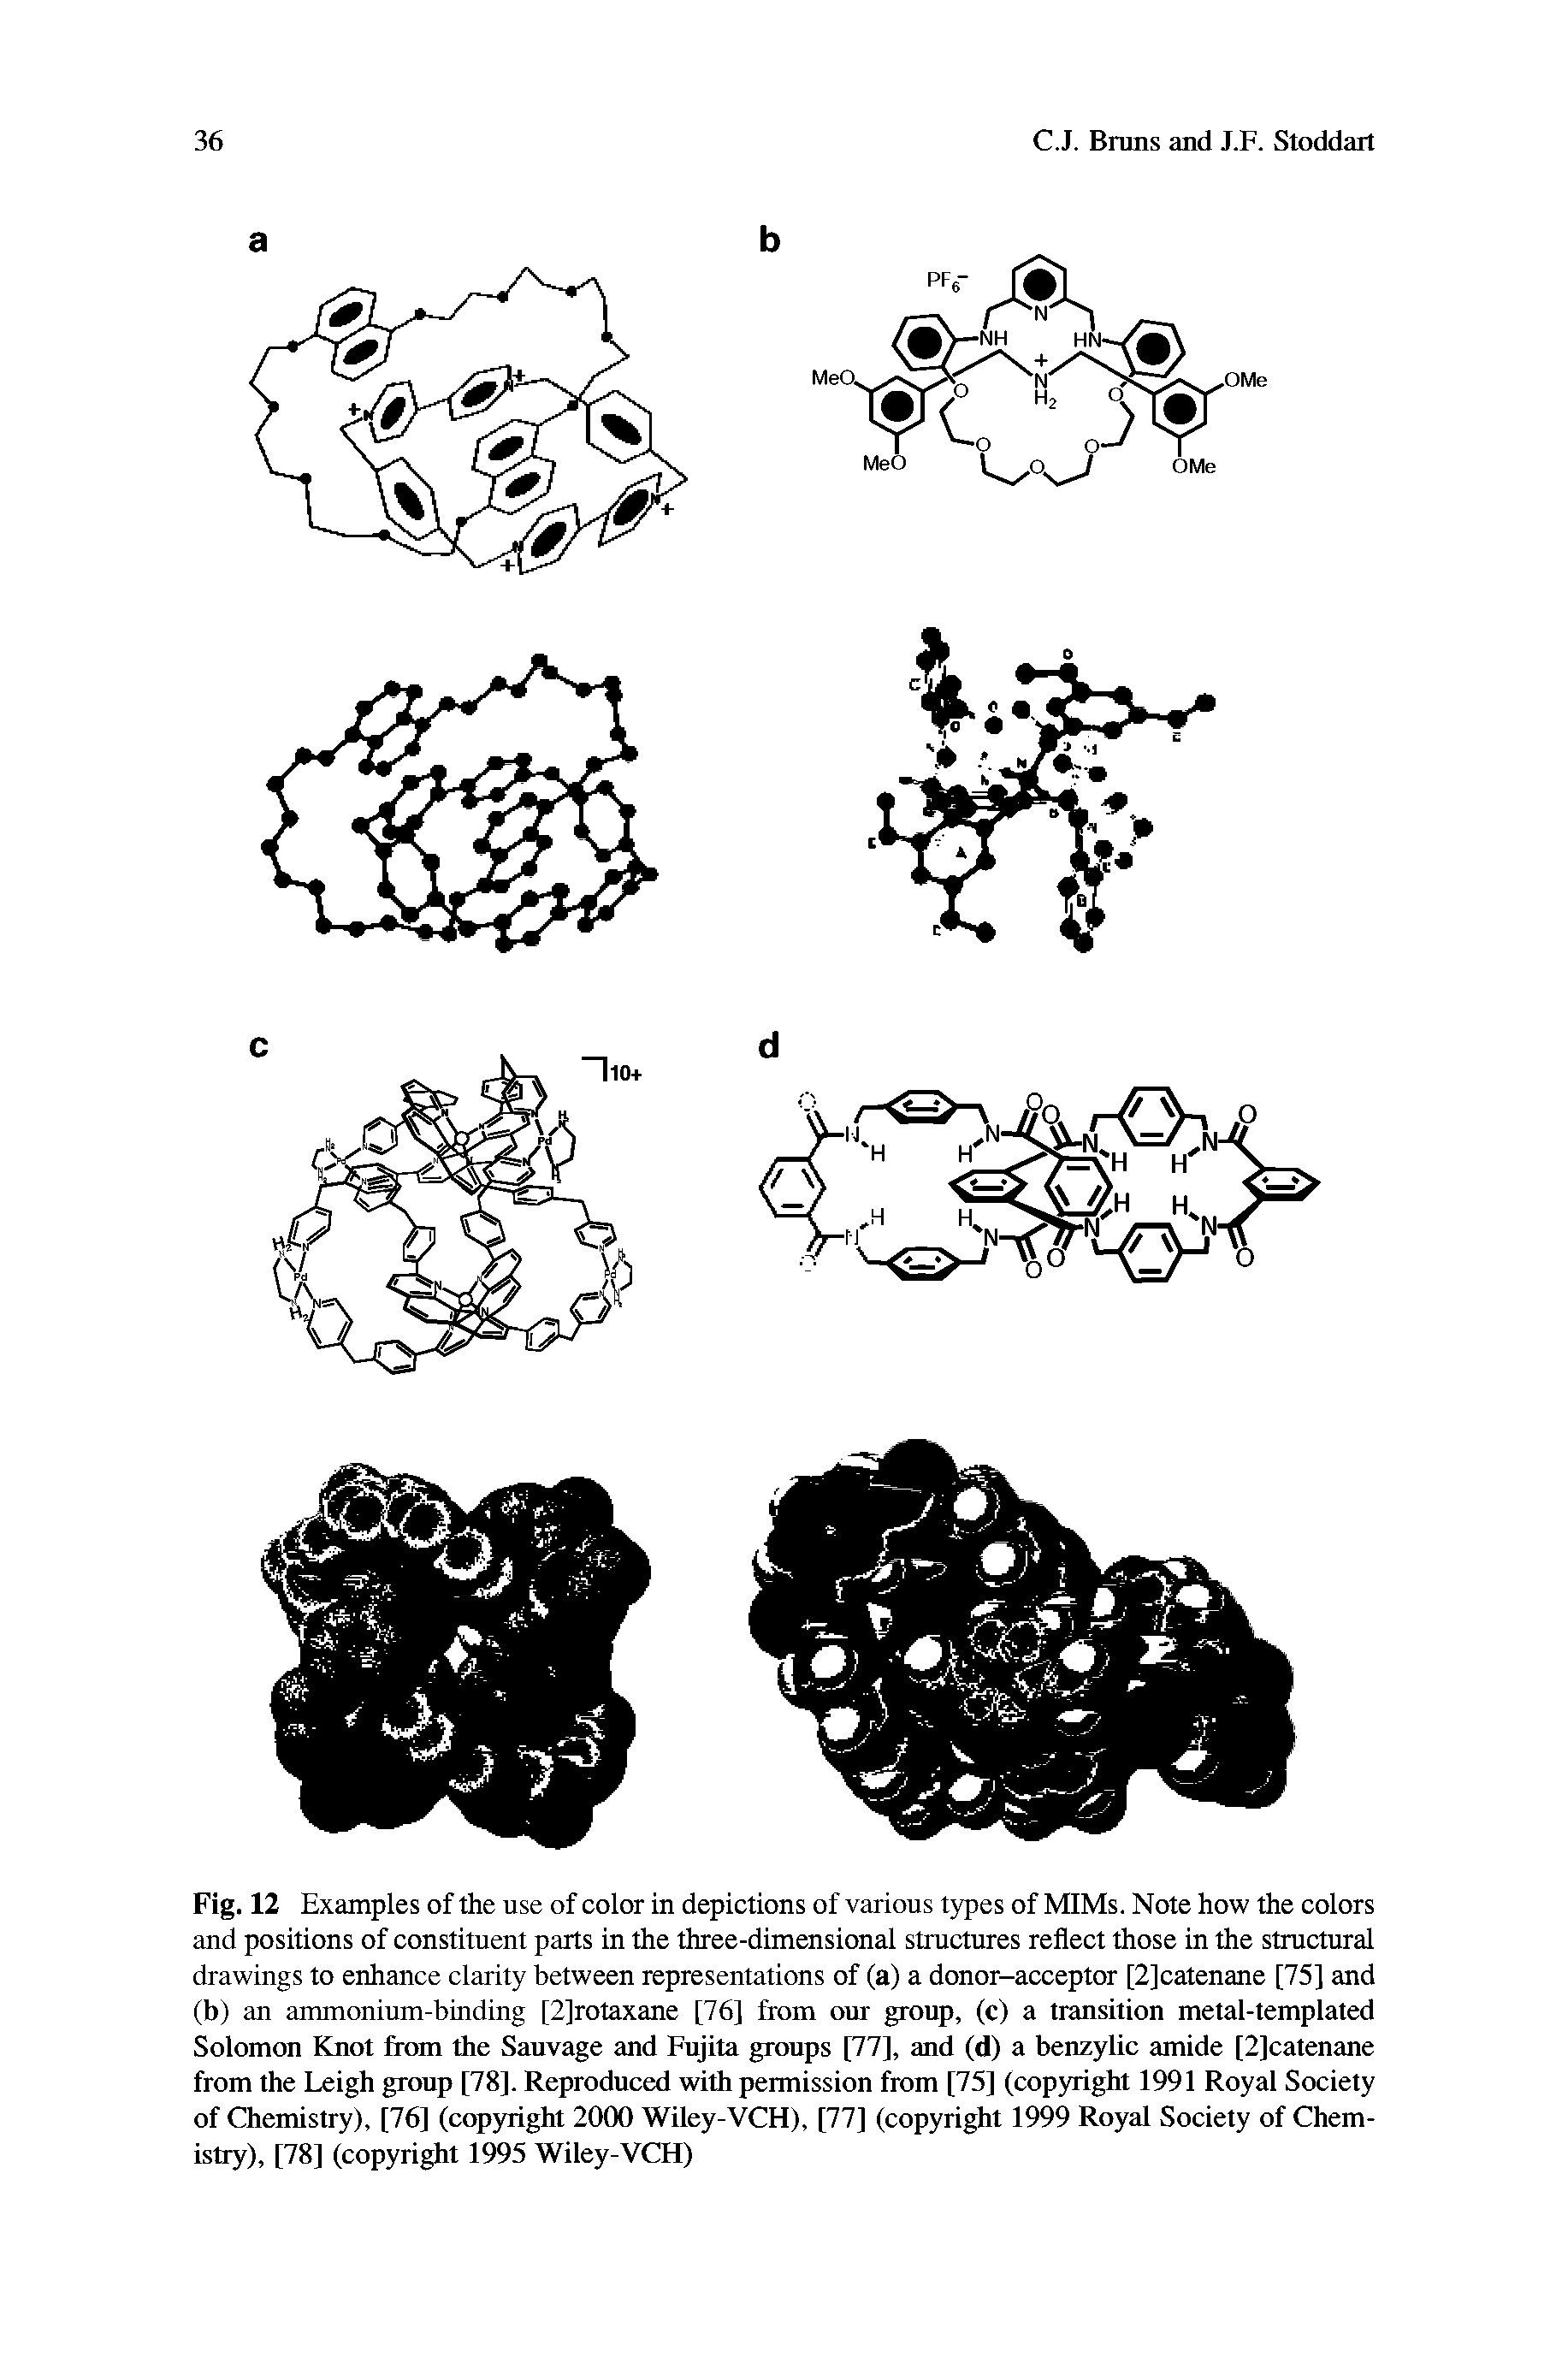 Fig. 12 Examples of the use of color in depictions of various types of MIMs. Note how the colors and positions of constituent parts in the three-dimensional structures reflect those in the structural drawings to enhance clarity between representations of (a) a donor-acceptor [2]catenane [75] and (b) an ammonium-binding [2]rotaxane [76] from our group, (c) a transition metal-templated Solomon Knot from the Sauvage and Fujita groups [77], and (d) a benzylic amide [2]catenane from the Leigh group [78]. Reproduced with permission from [75] (copyright 1991 Royal Society of Chemistry), [76] (copyright 2000 Wiley-VCH), [77] (copyright 1999 Royal Society of Chemistry), [78] (copyright 1995 Wiley-VCH)...